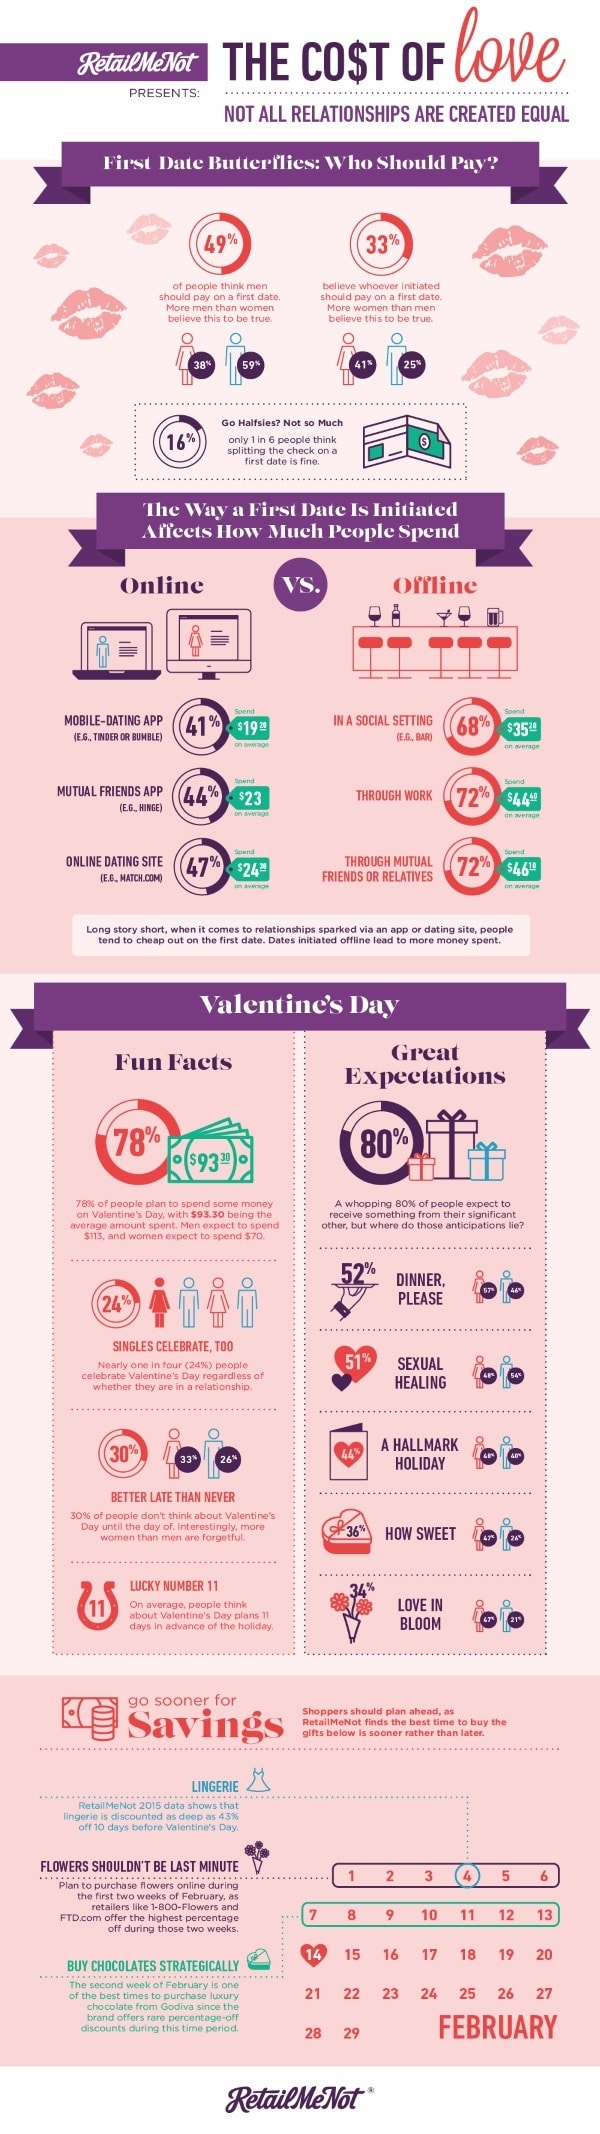 love graphics calculate costs associated with relationships